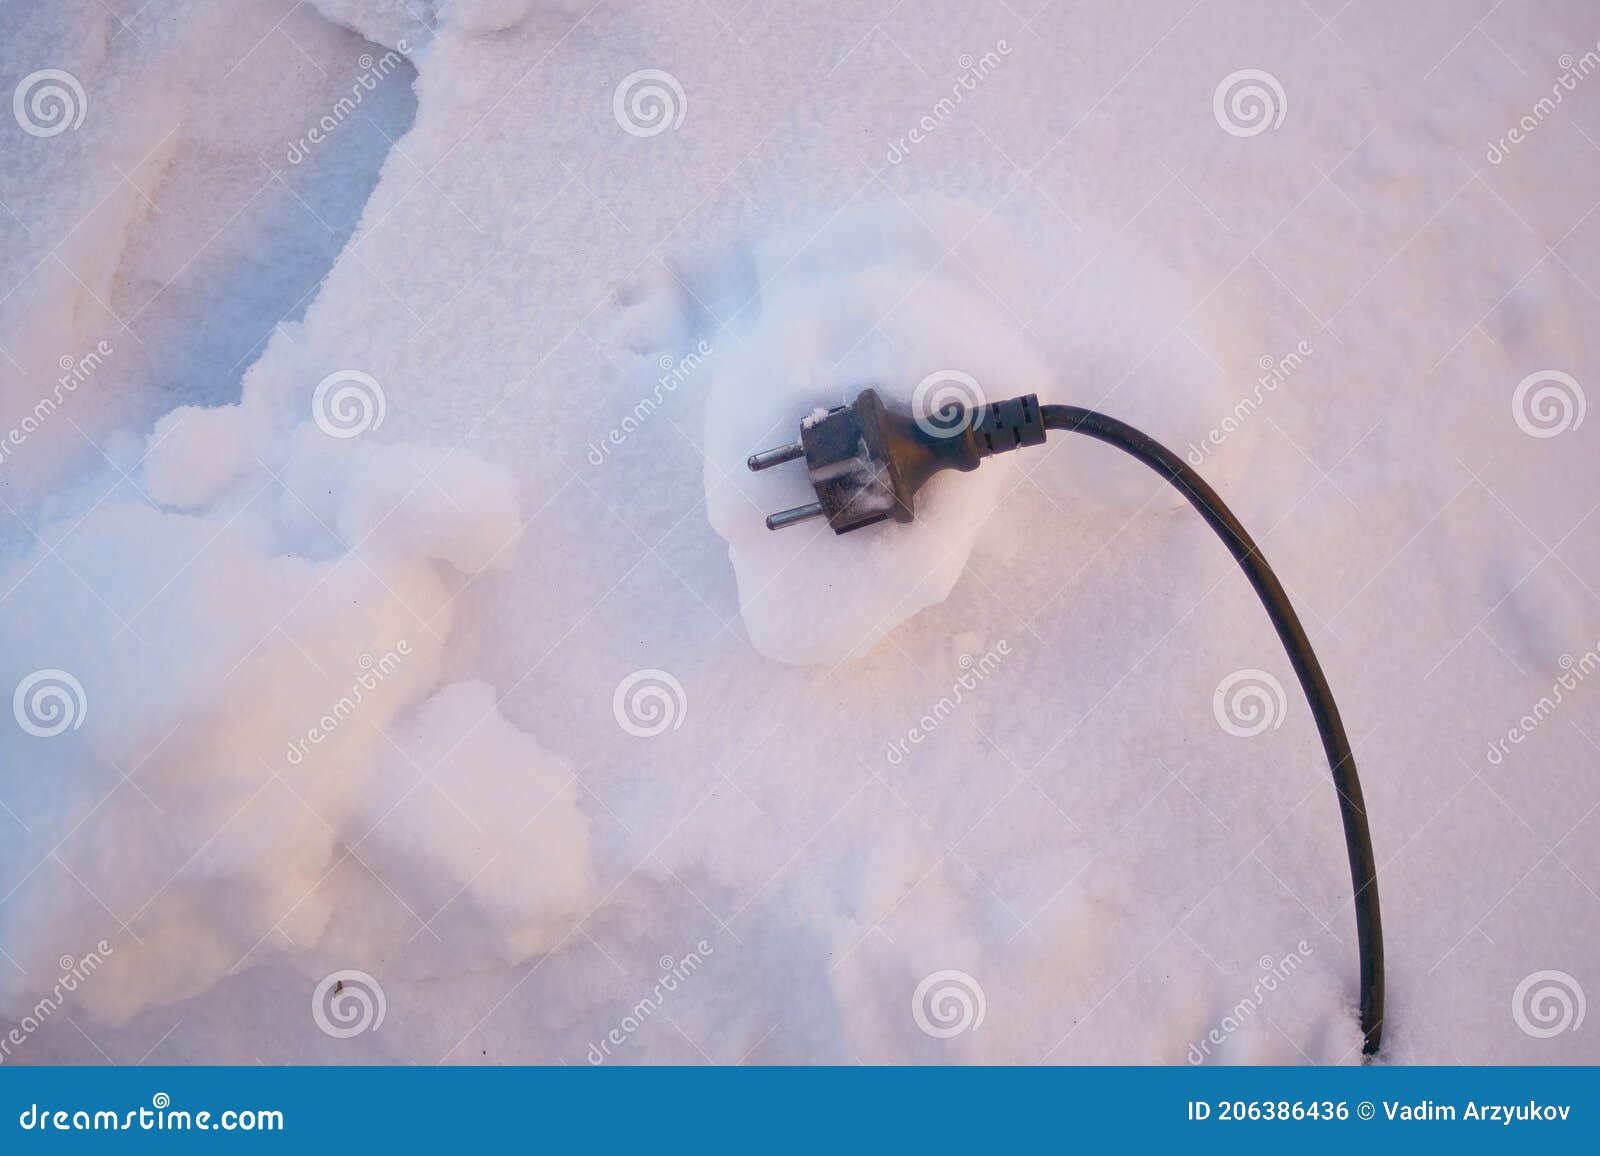 black electric wire from the device lies on the snow